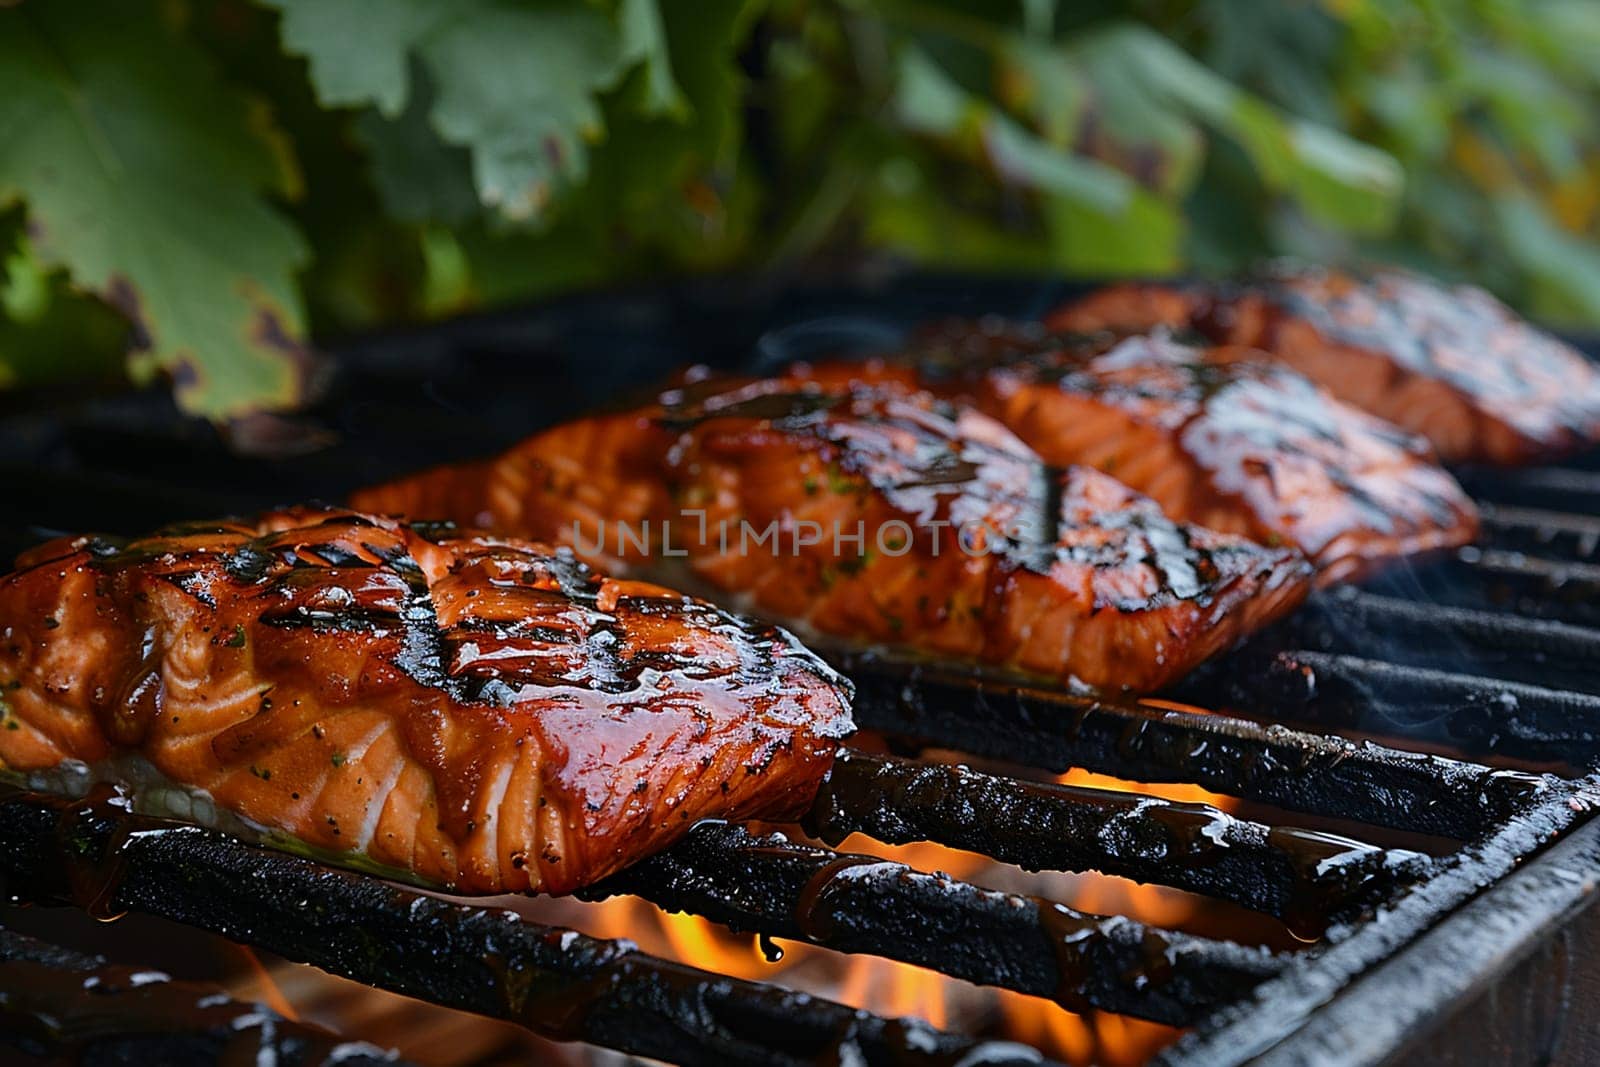 Close-up of juicy grilled salmon fillets with herbs on flaming grill, capturing outdoor cooking experience and gourmet seafood cuisine.